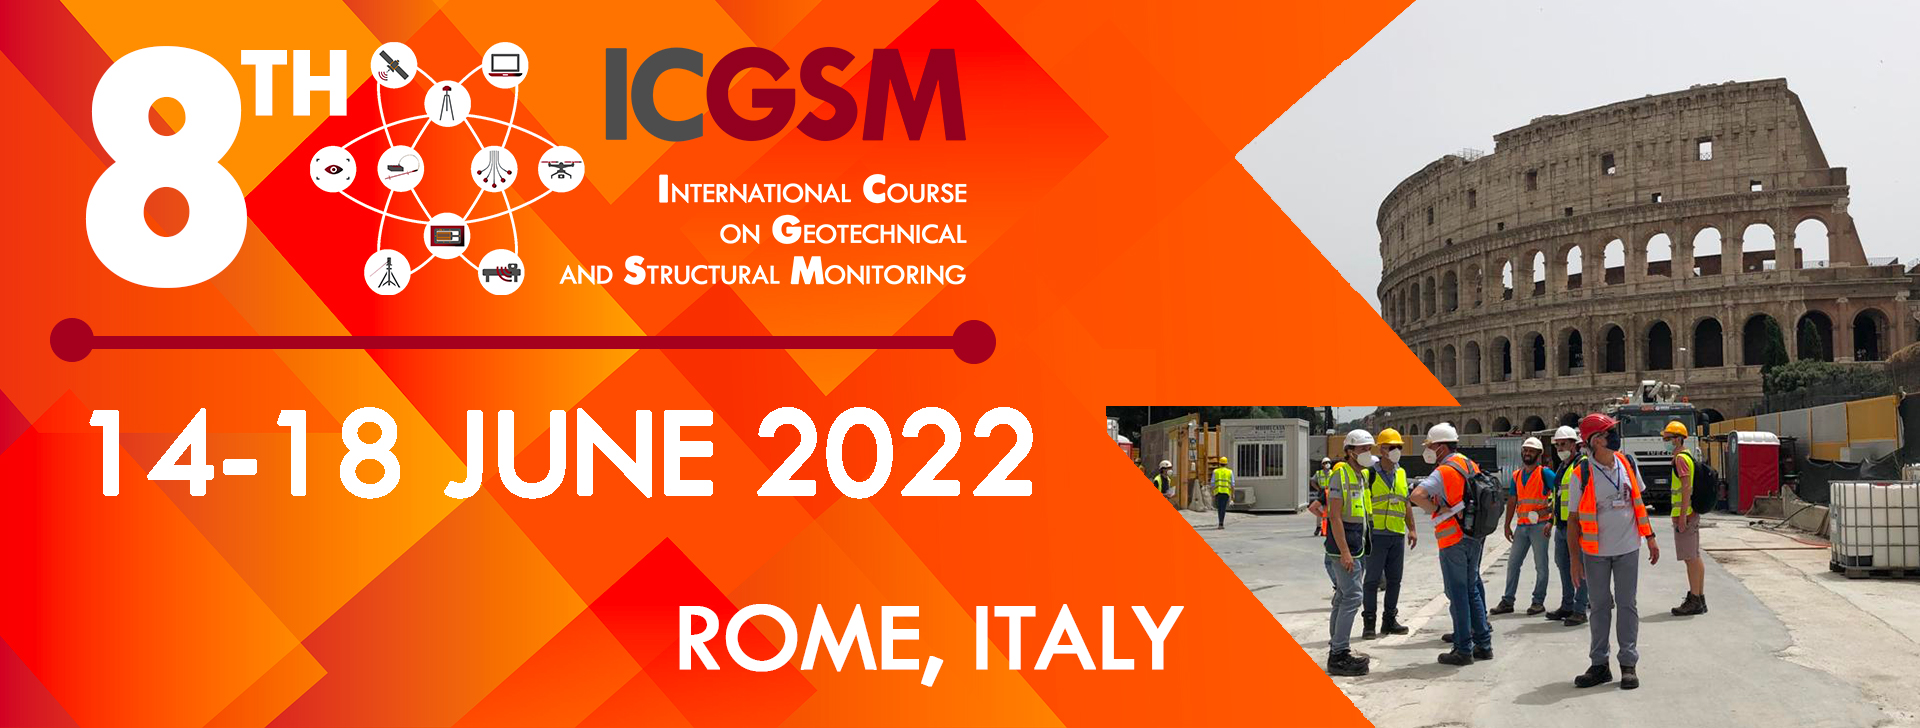 8th International Course on Geotechnical and Structural Monitoring